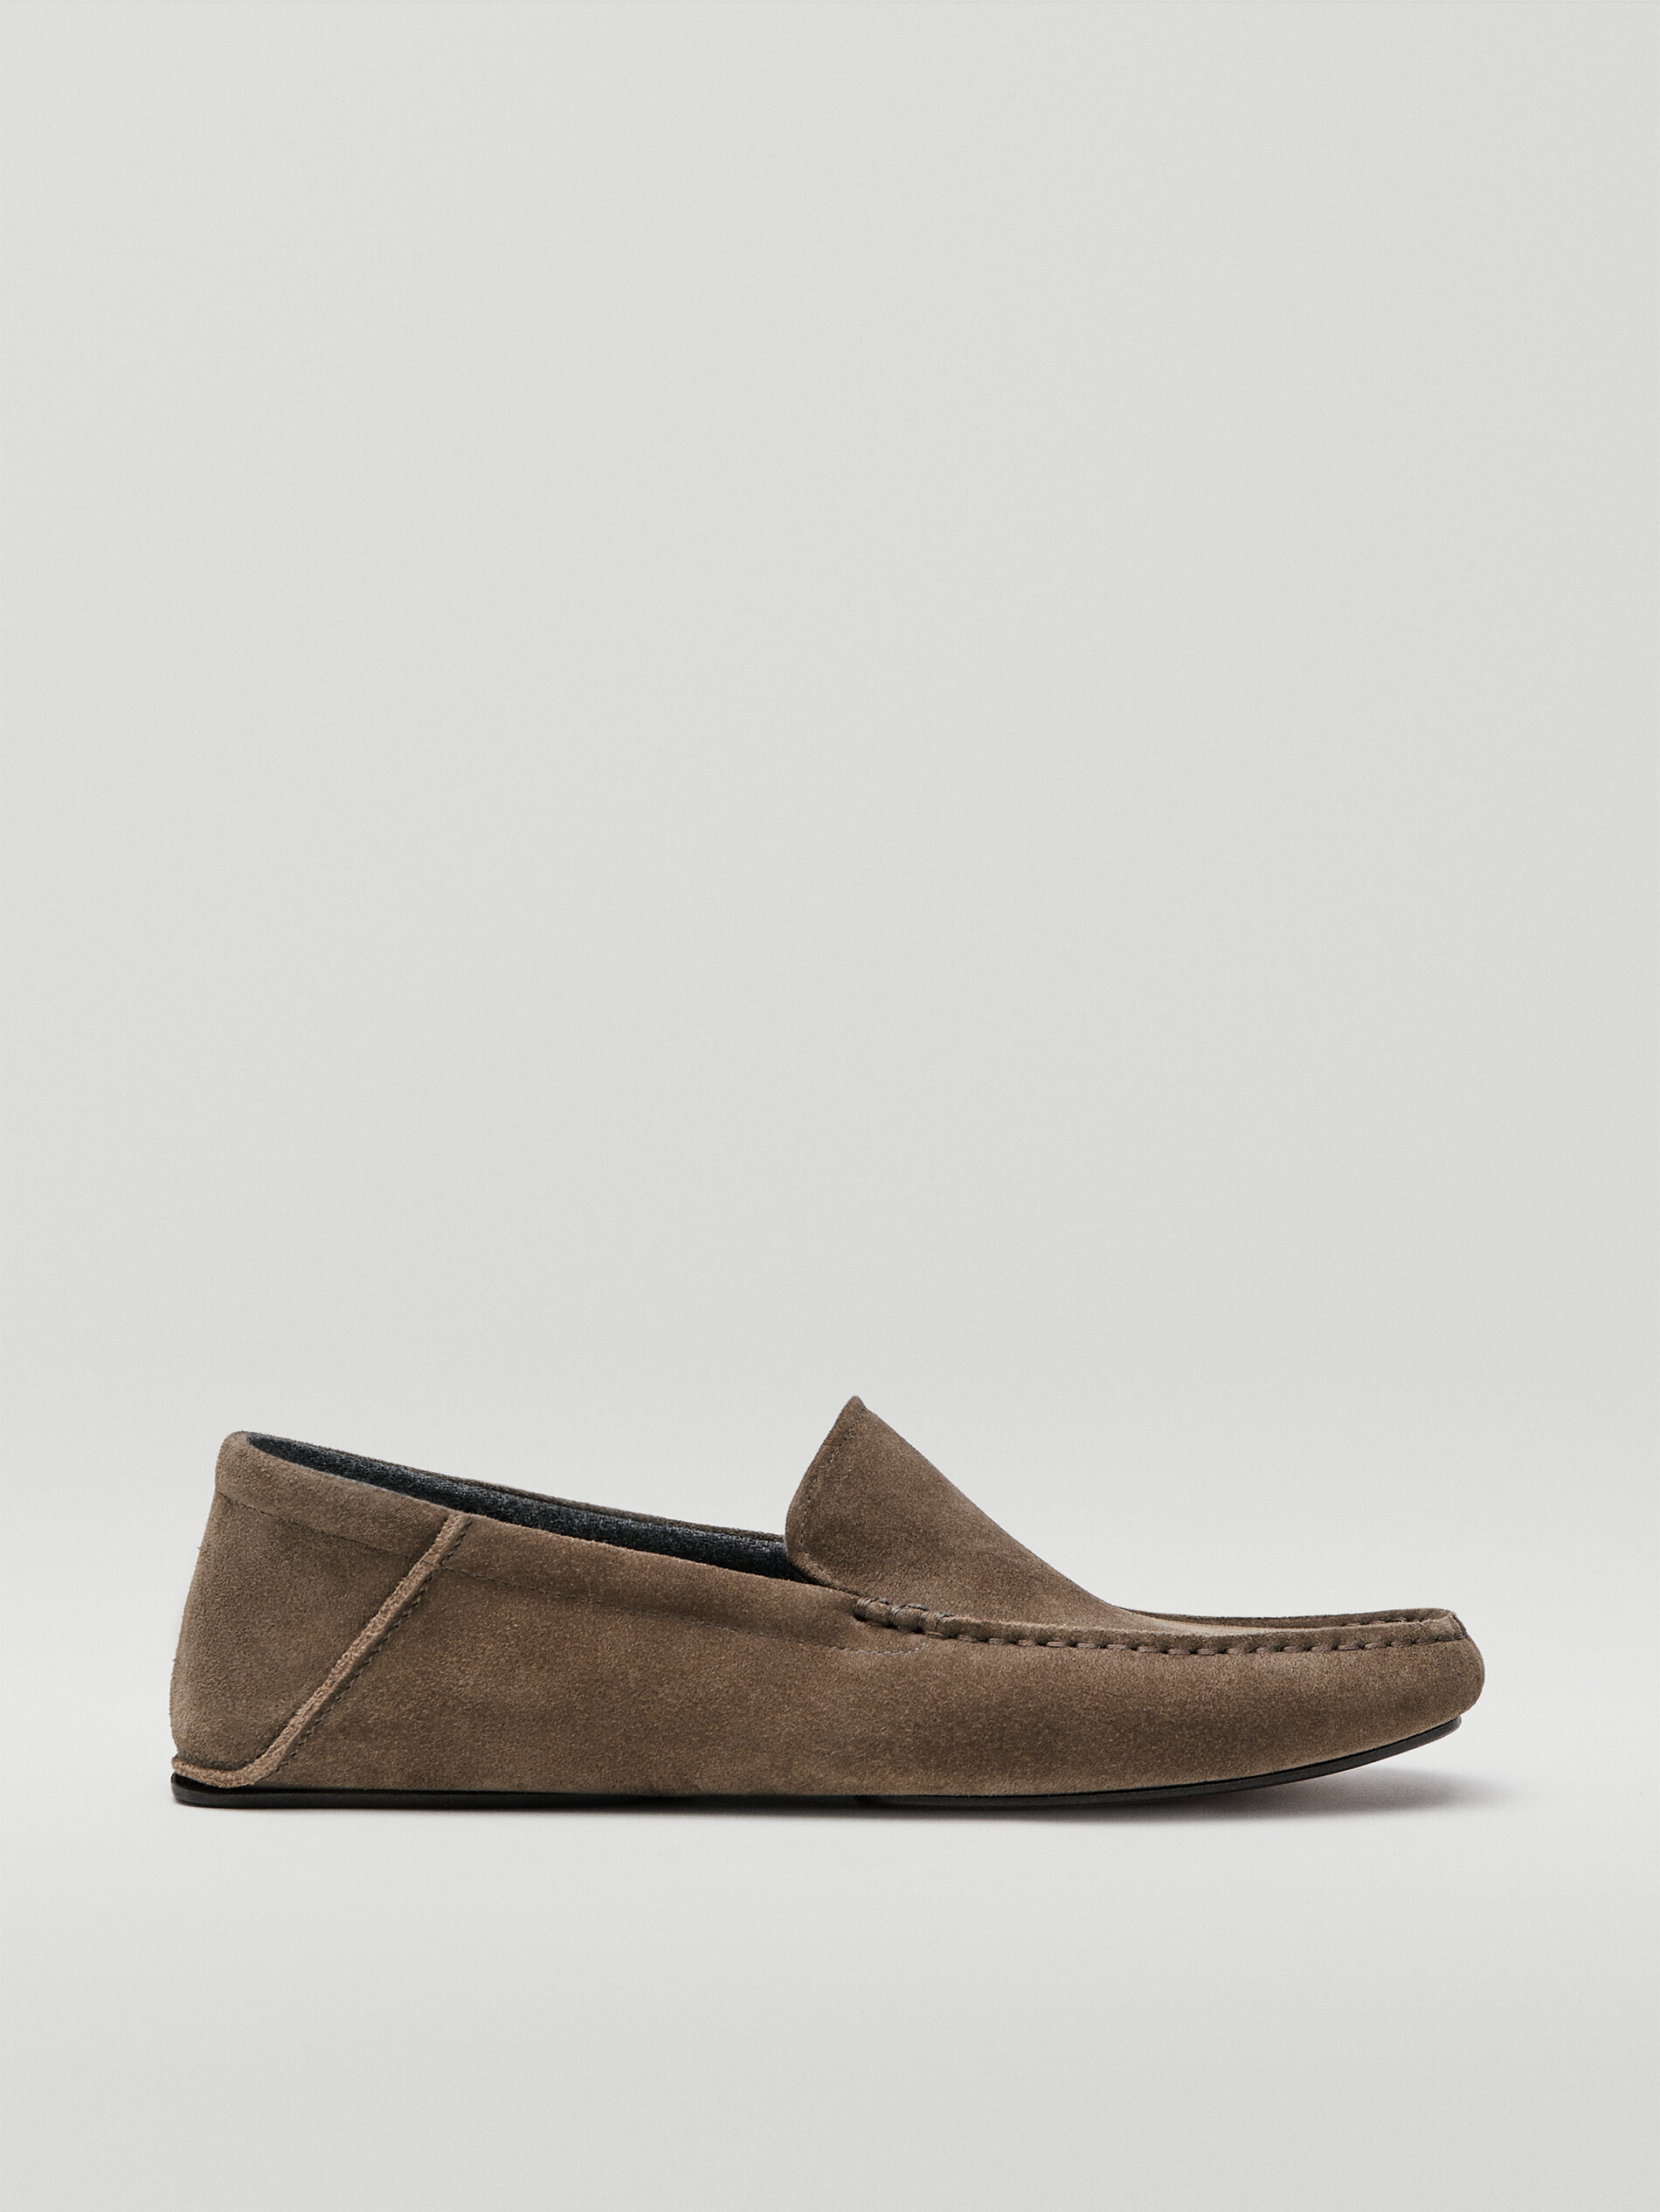 suede house slippers